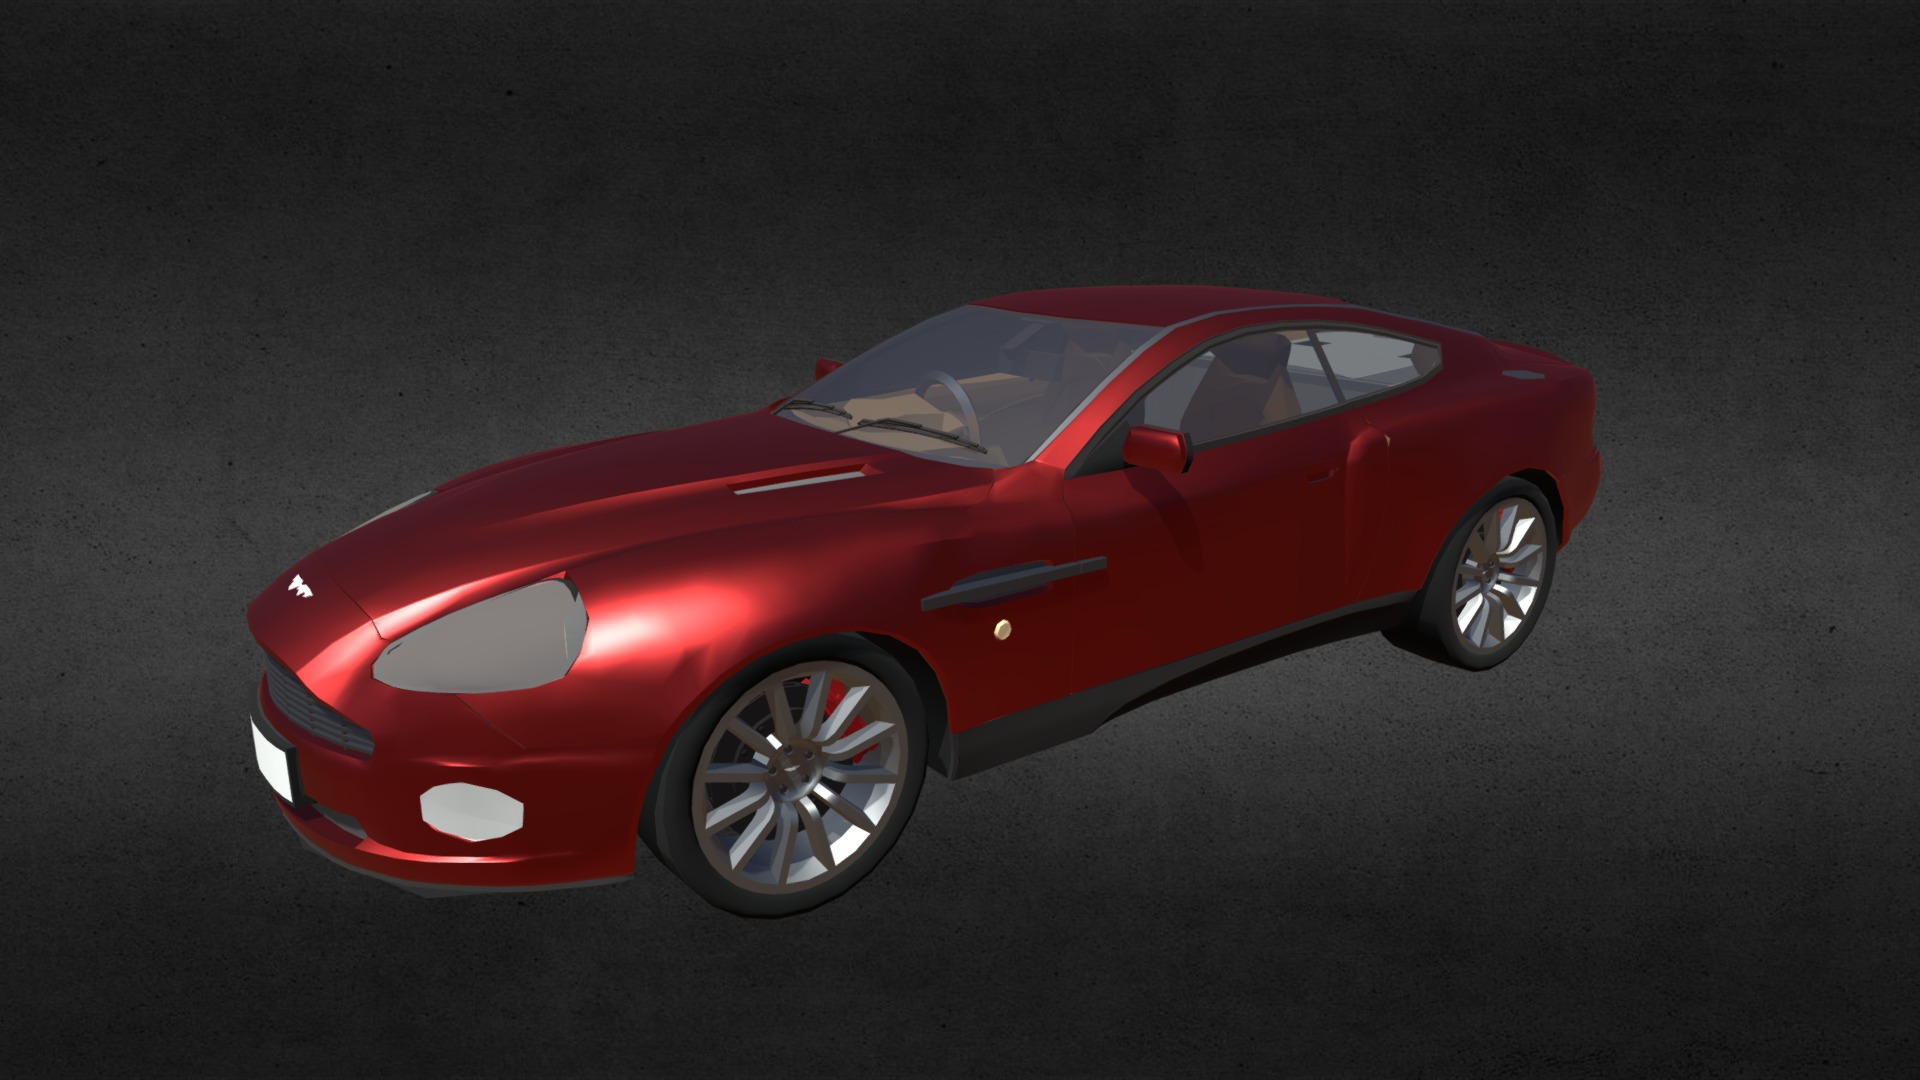 3D model Aston Martin DB7 - This is a 3D model of the Aston Martin DB7. The 3D model is about a red sports car.